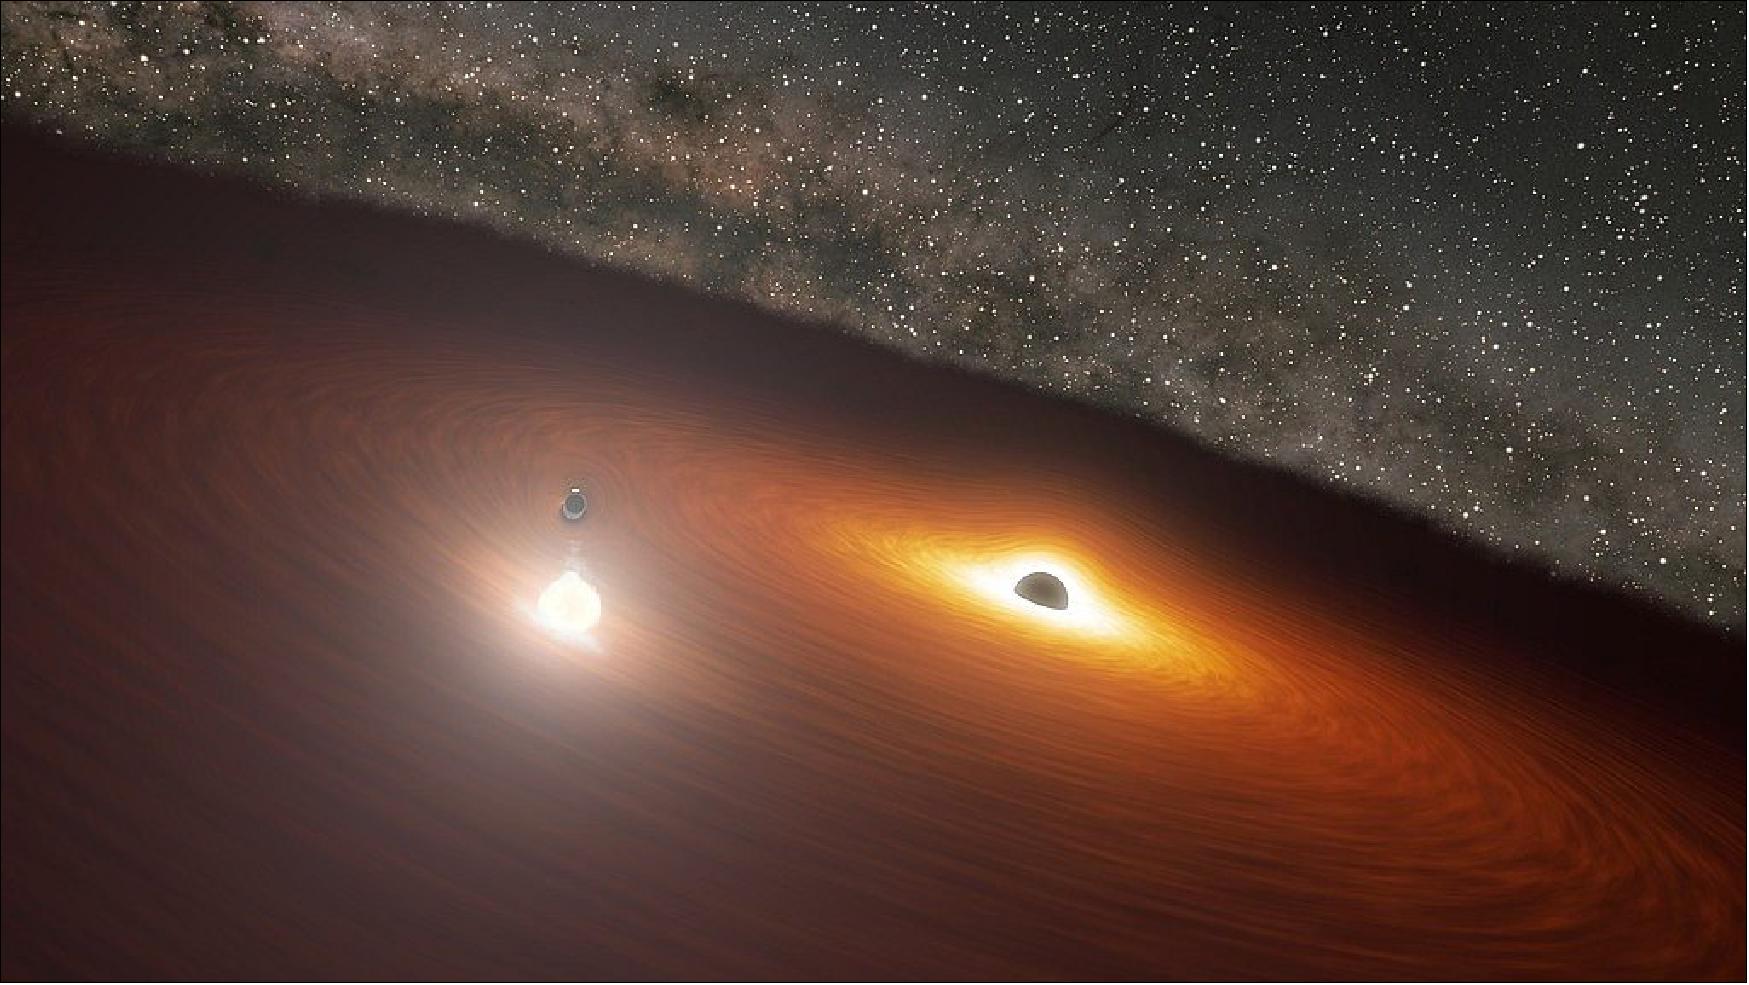 Figure 31: This artwork shows two massive black holes in the OJ 287 galaxy. The smaller black hole orbits the larger one, which remains stationary and is surrounded by a disk of gas. When the smaller black hole crashes through the disk, it produces a flare brighter than 1 trillion stars. But the smaller black hole's orbit is elongated and moving relative to the disk, causing the flares to occur irregularly (image credit: NASA/JPL-Caltech)